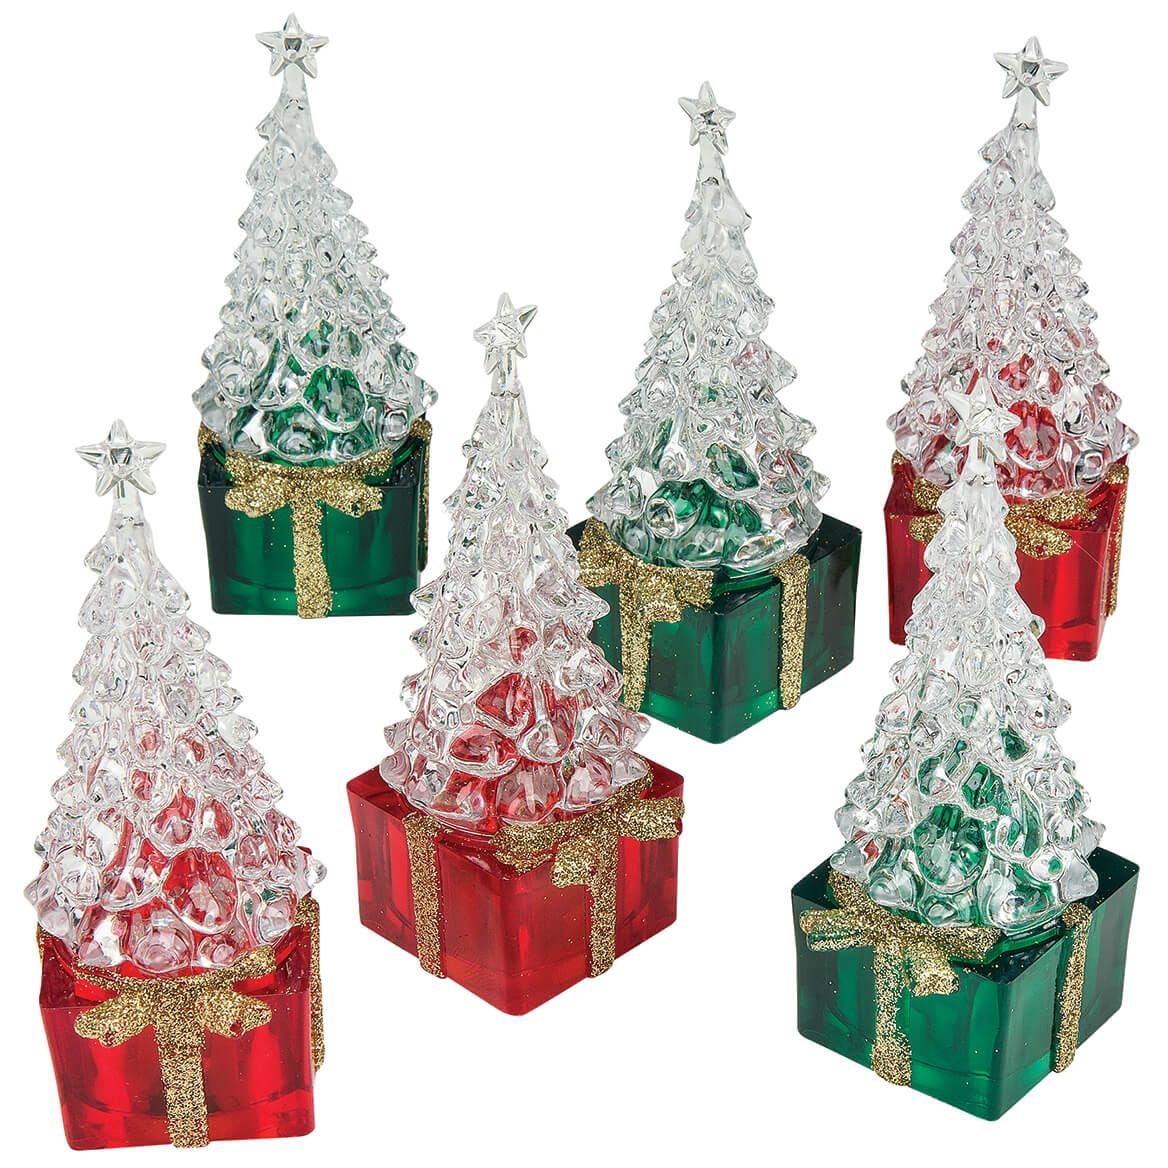 Lighted Trees On Gifts By Holiday Peak™, Set of 6 + '-' + 375859